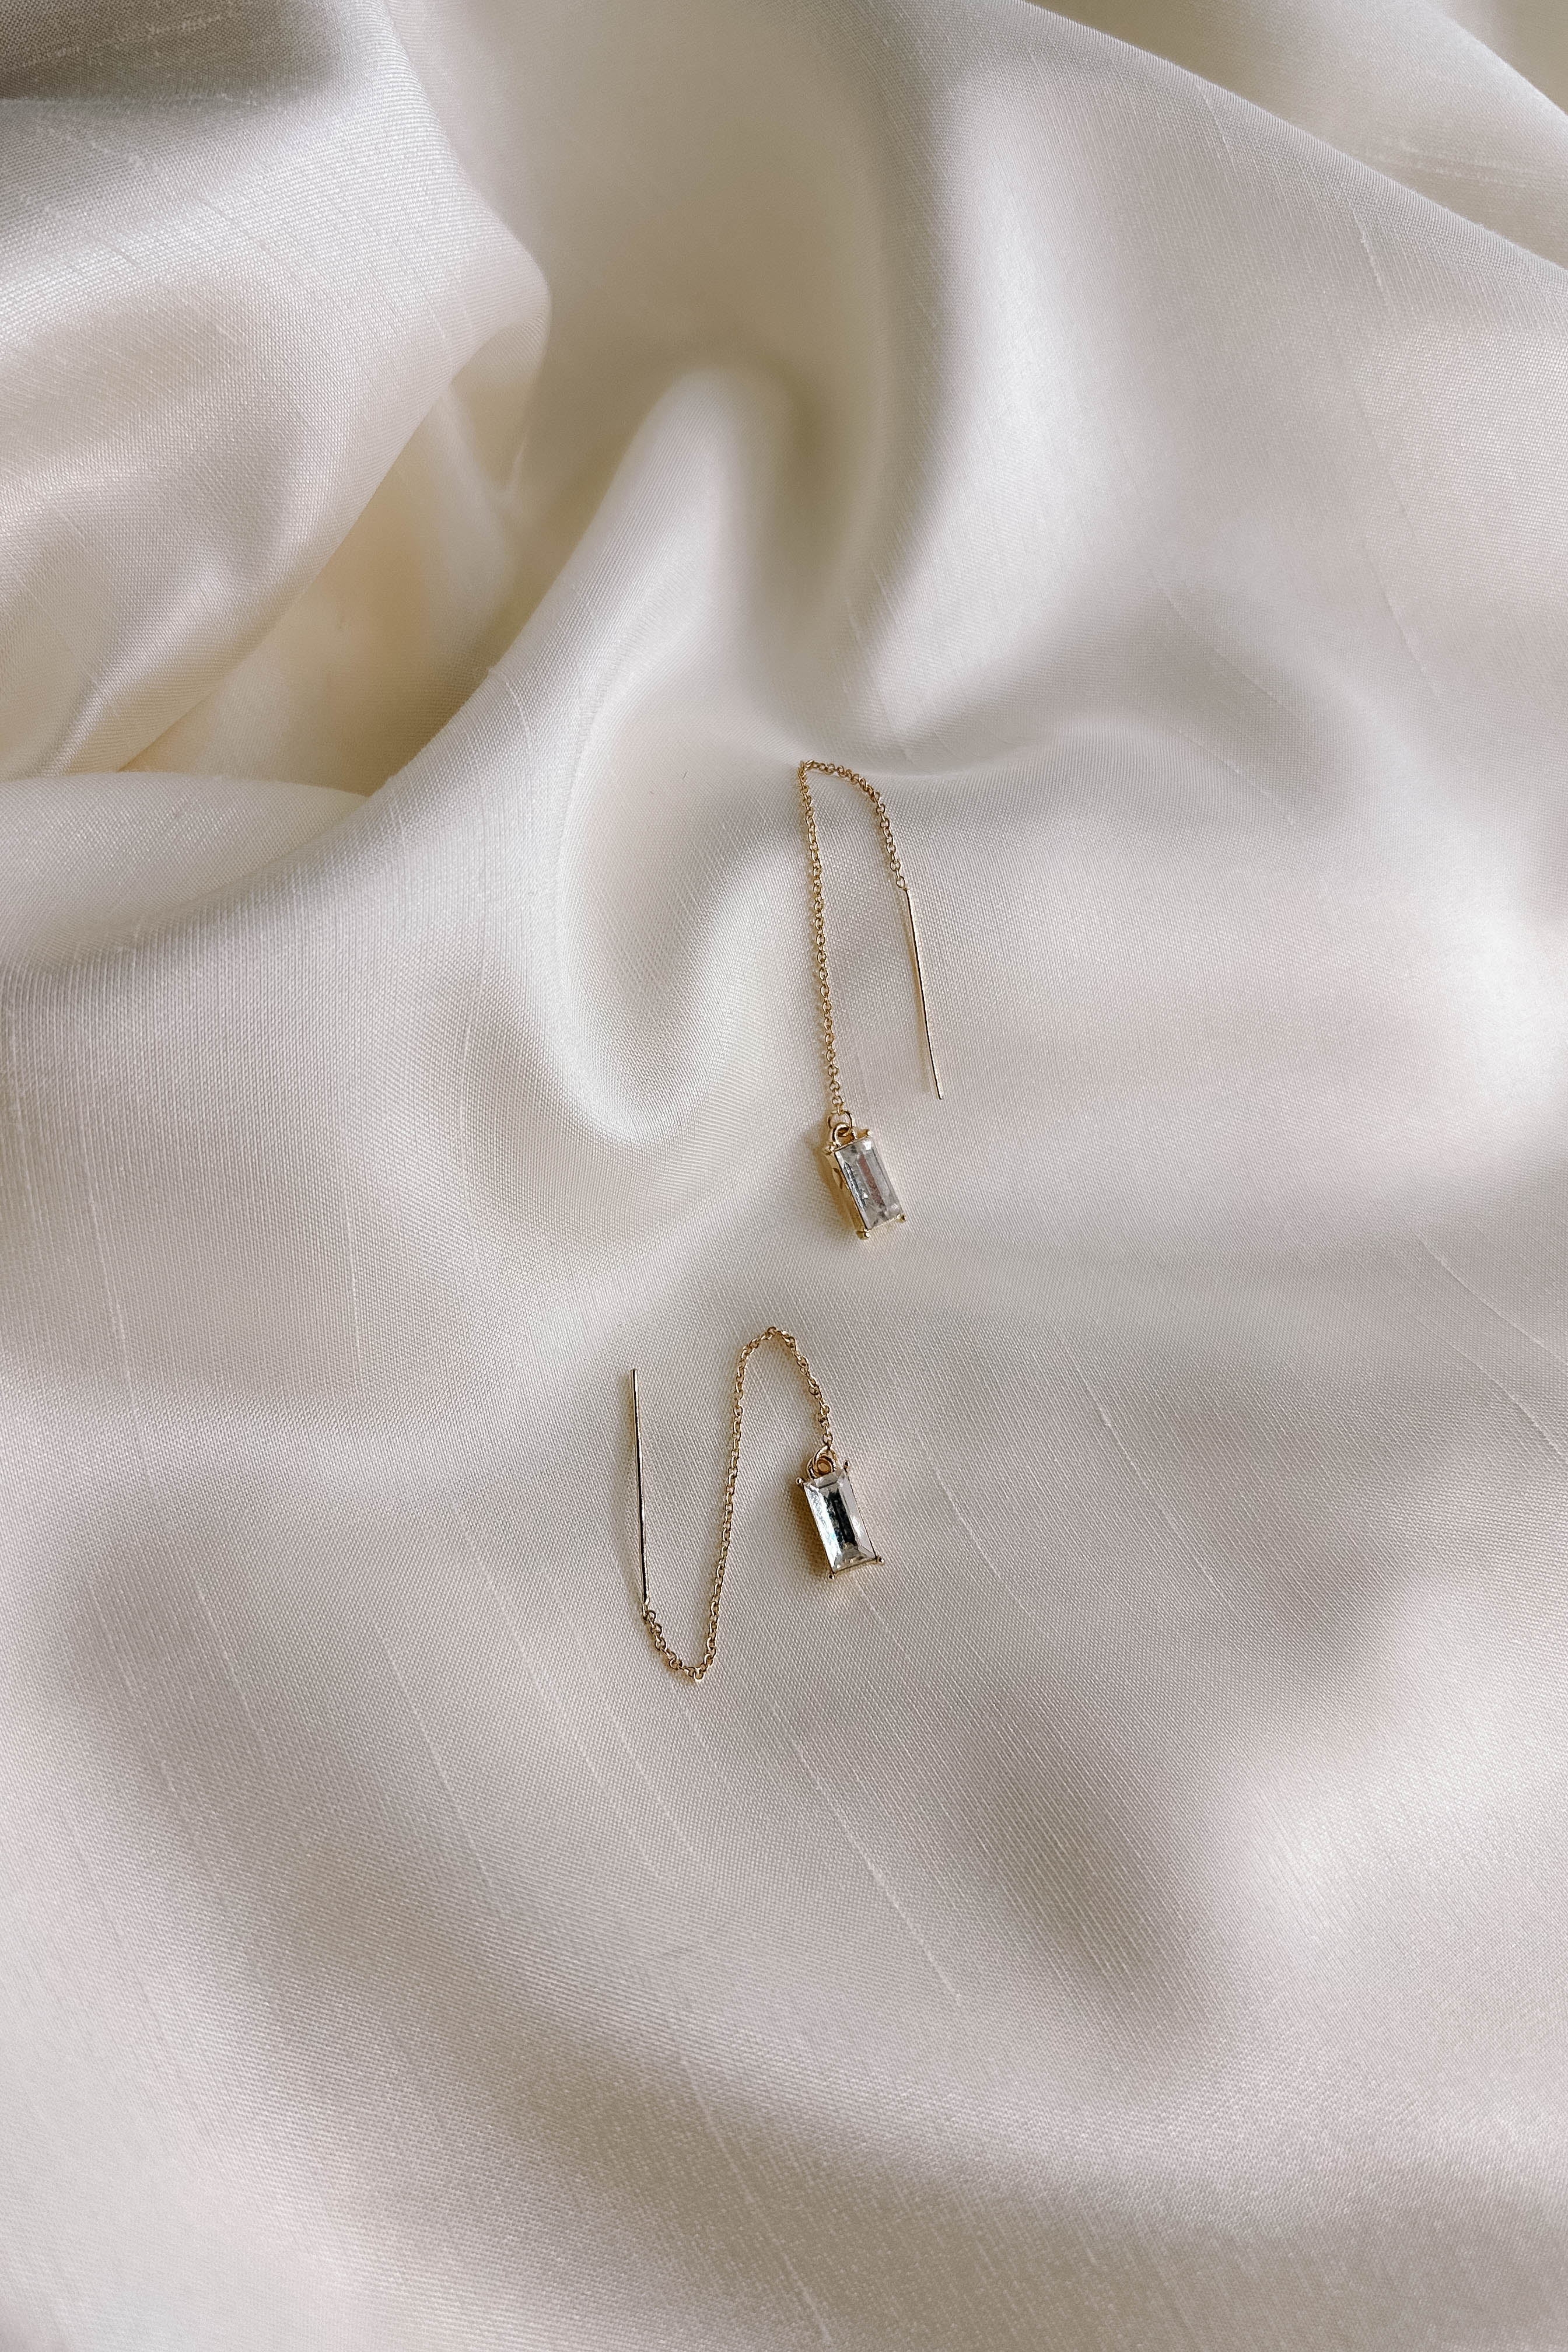 Top view of the Deena Gold Chain Rhinestone Dangle Earring which features gold dangle earrings linked to clear rectangle shaped stones, shown on cream fabric.